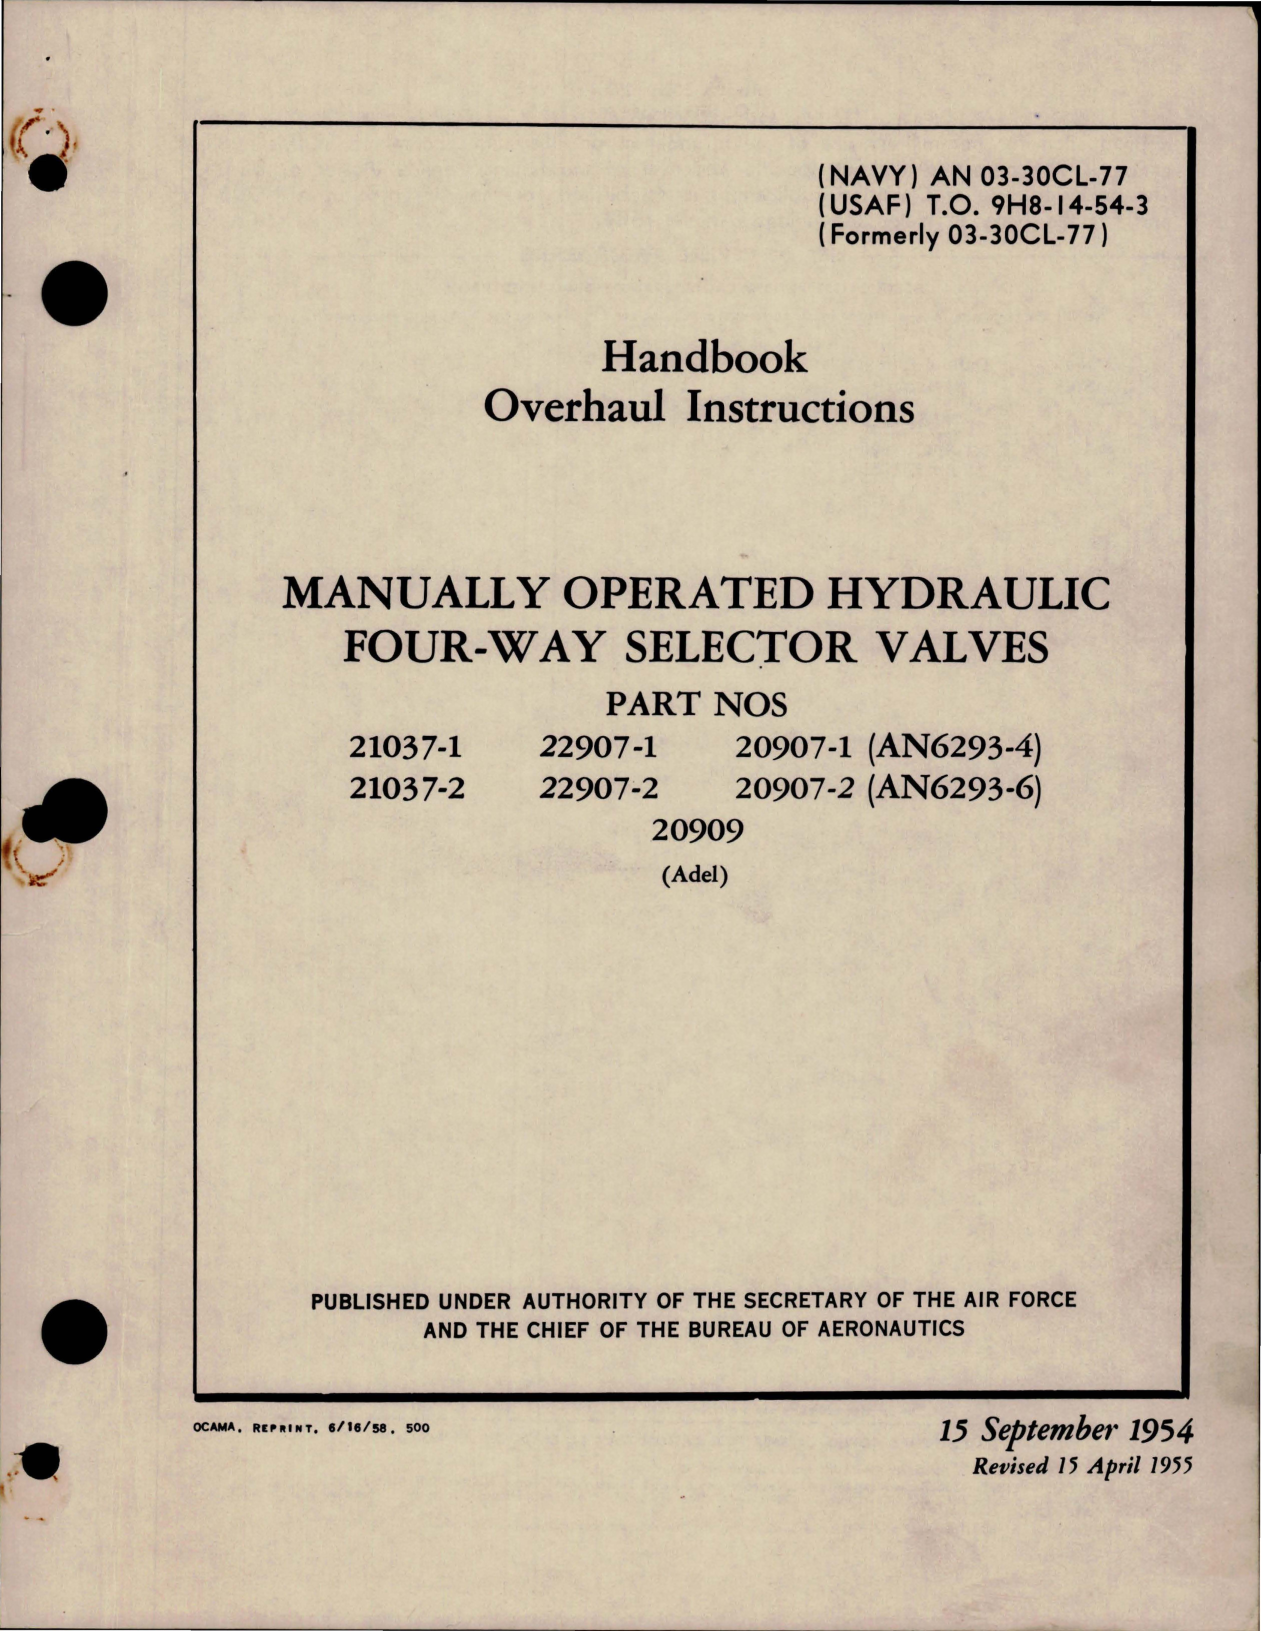 Sample page 1 from AirCorps Library document: Overhaul Instructions for Manually Operated Hydraulic Four-Way Selector Valves 